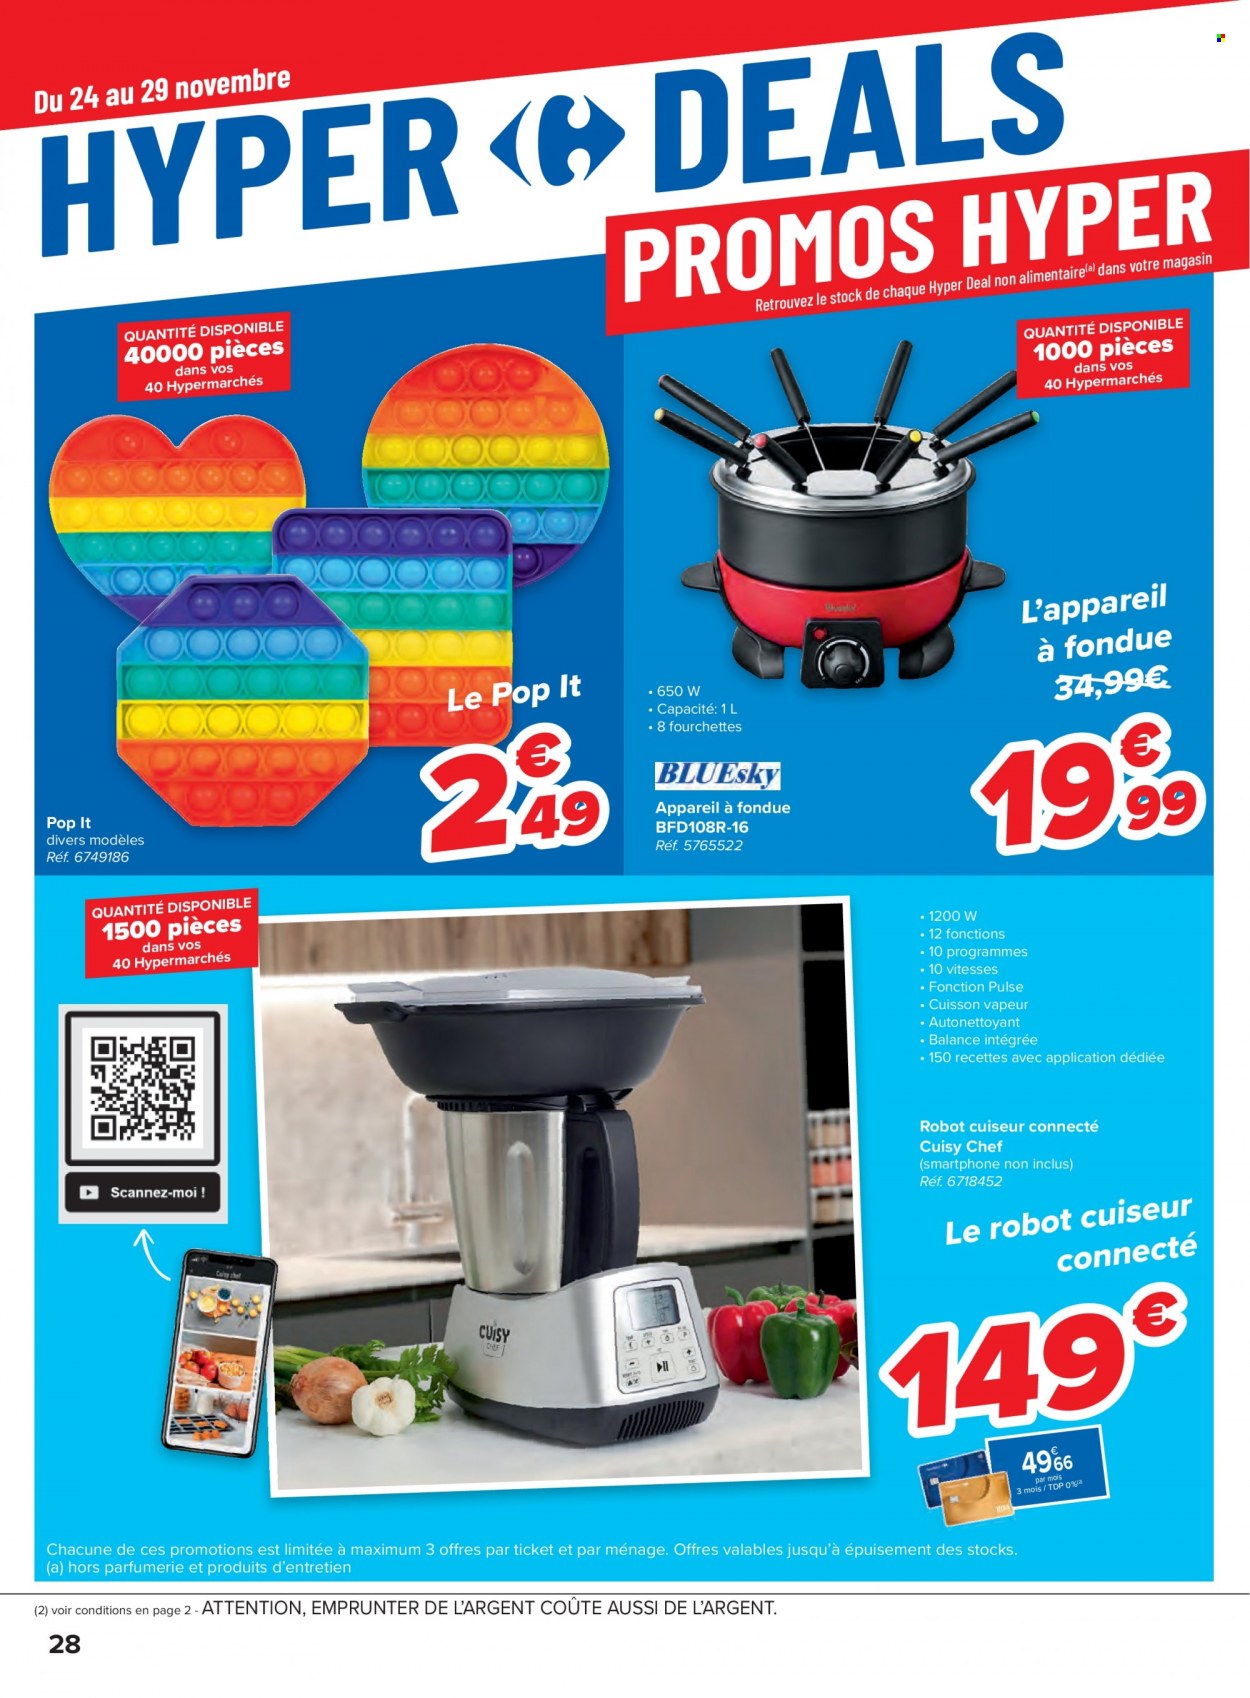 Catalogue Carrefour hypermarkt - 24.11.2021 - 6.12.2021. Page 28.